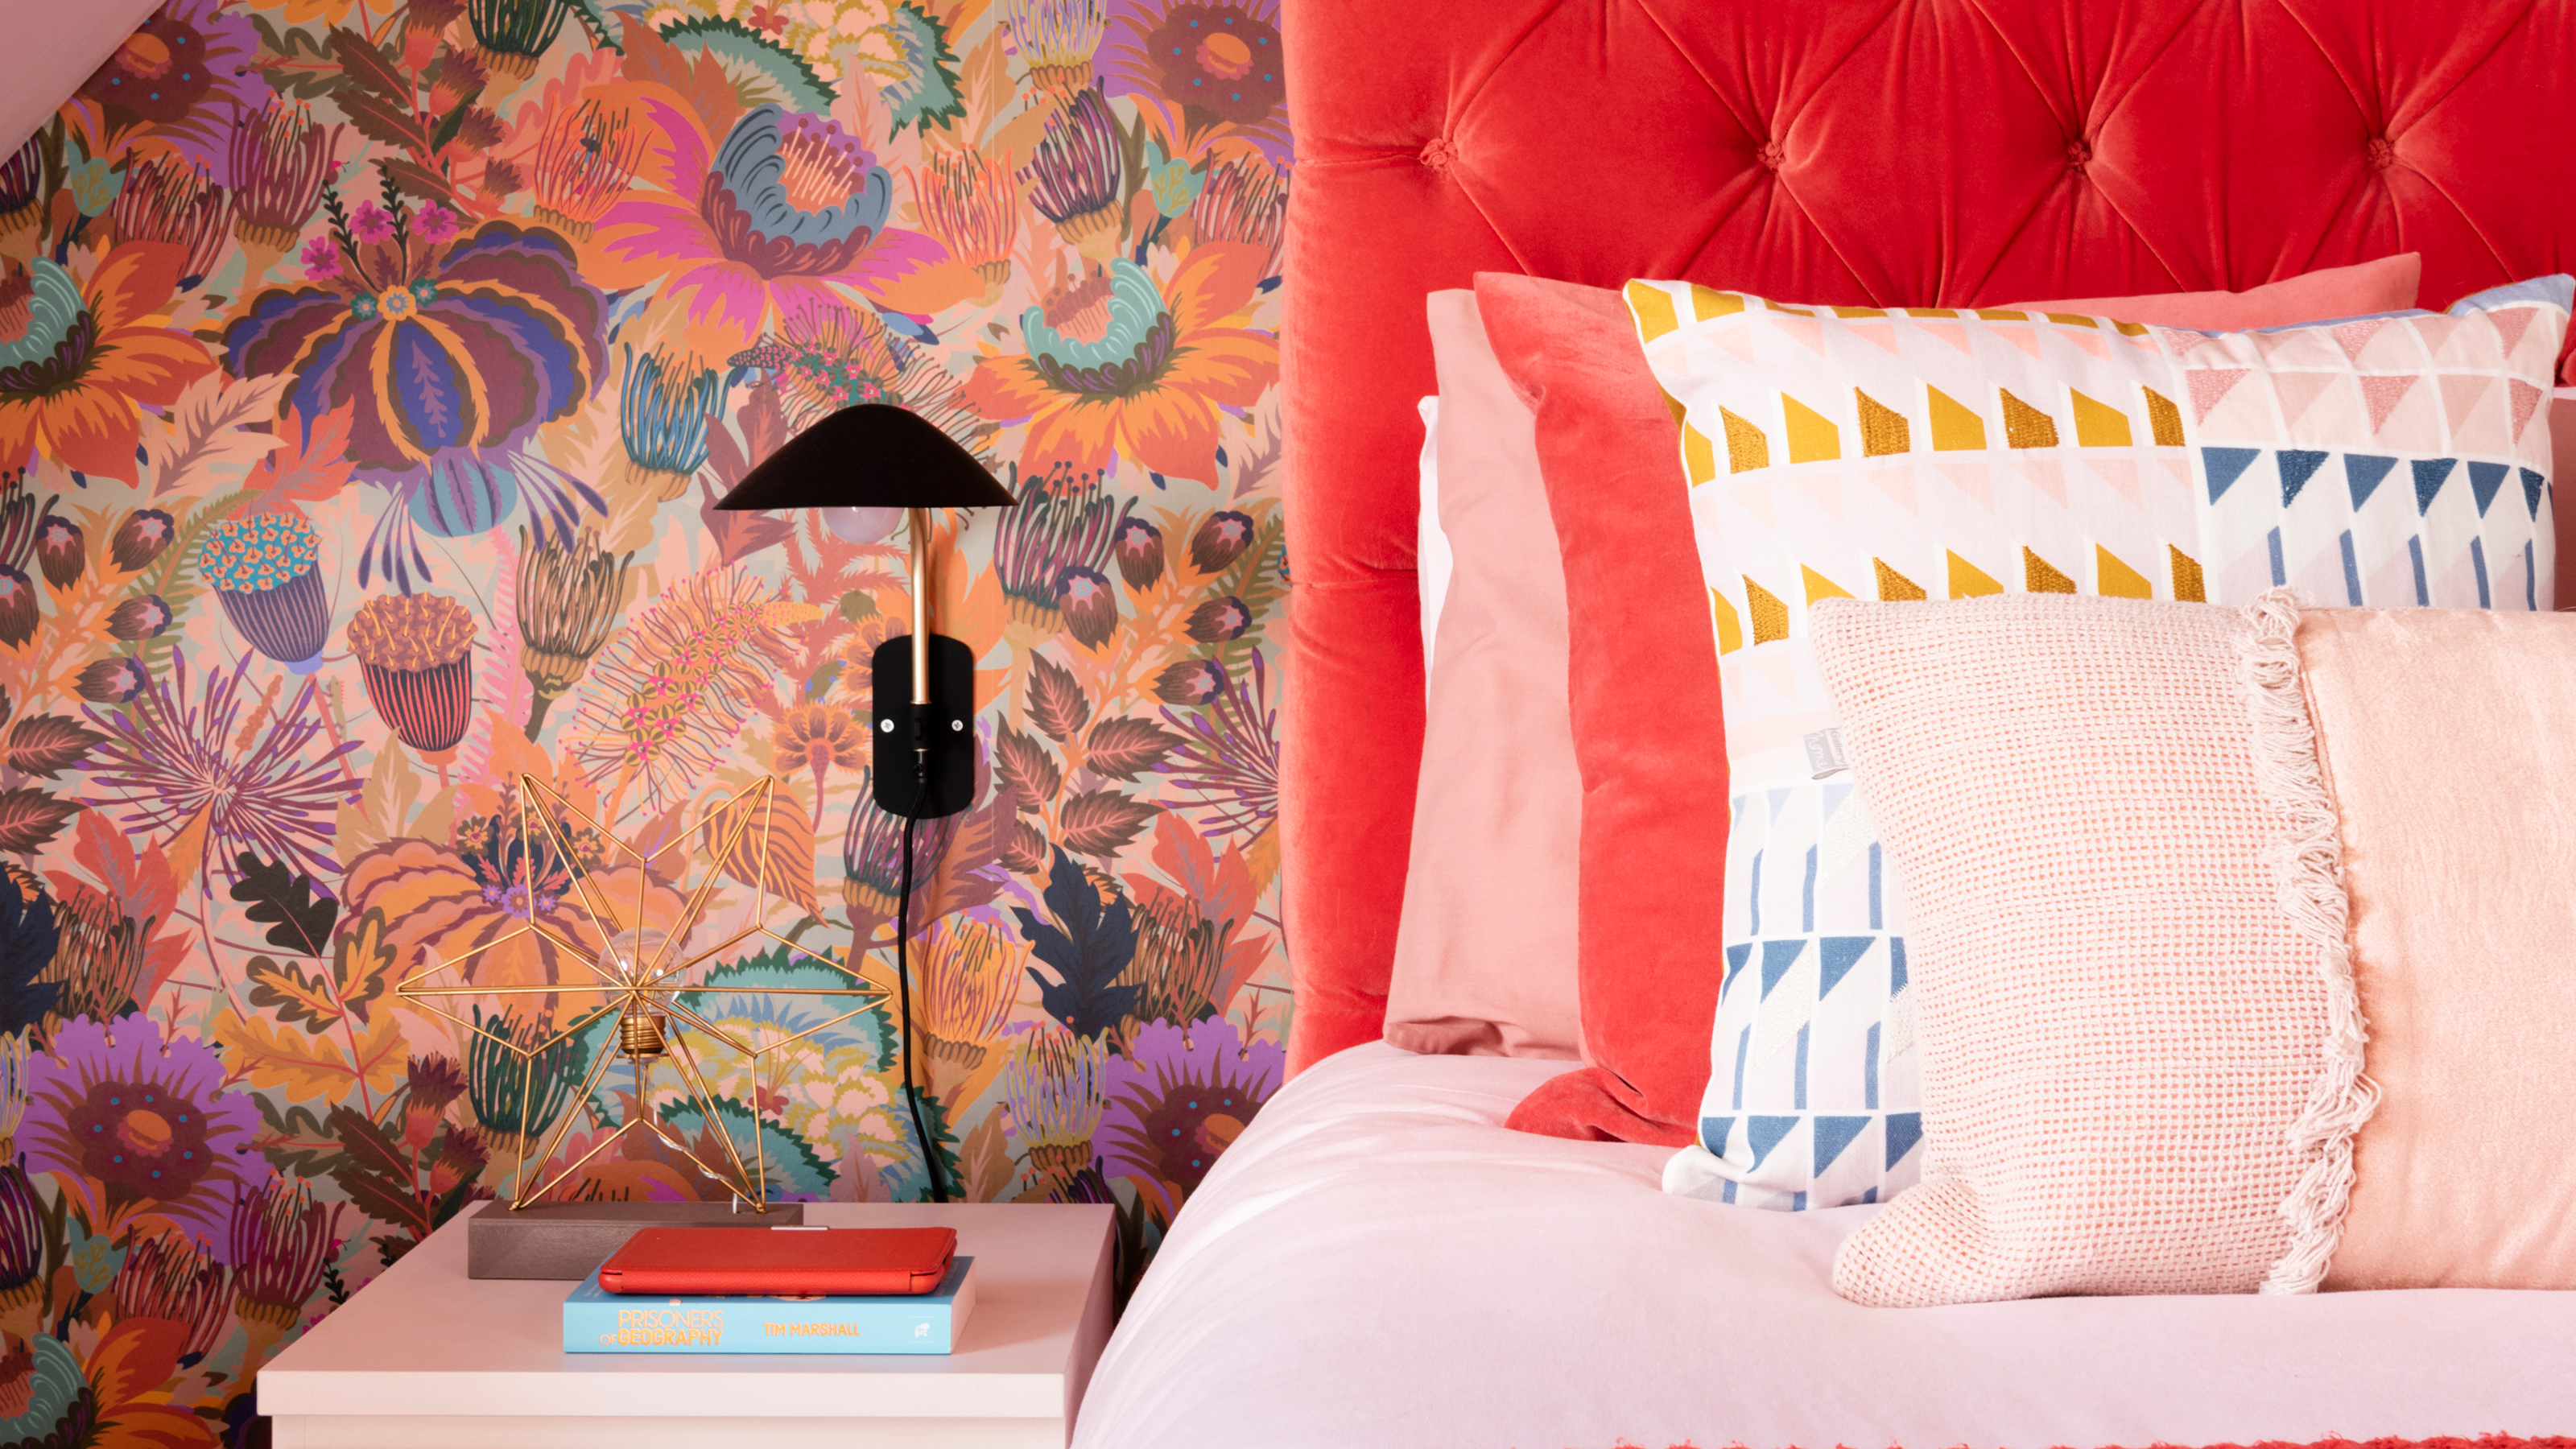 Fuchsia and orange are the colors of sweet LOVE . Find your love